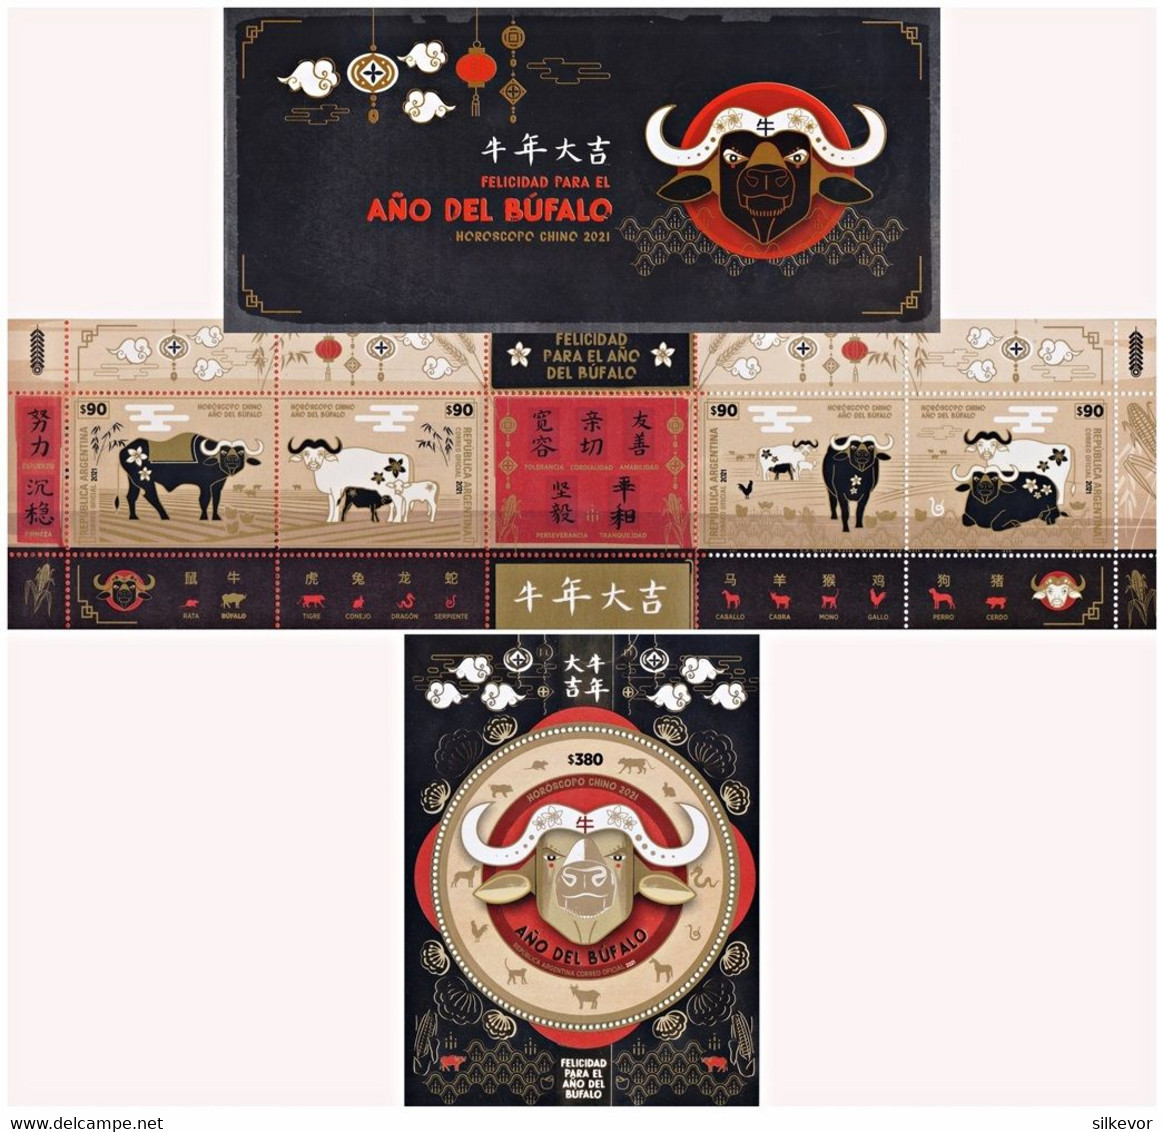 ARGENTINA-2021-STAMPS-YEAR OF THE BUFALO-CHINESE HOROSCOPE- BOOKLET + SOUVENIR SHEET-MNH- SEE IMAGE!! - Ungebraucht